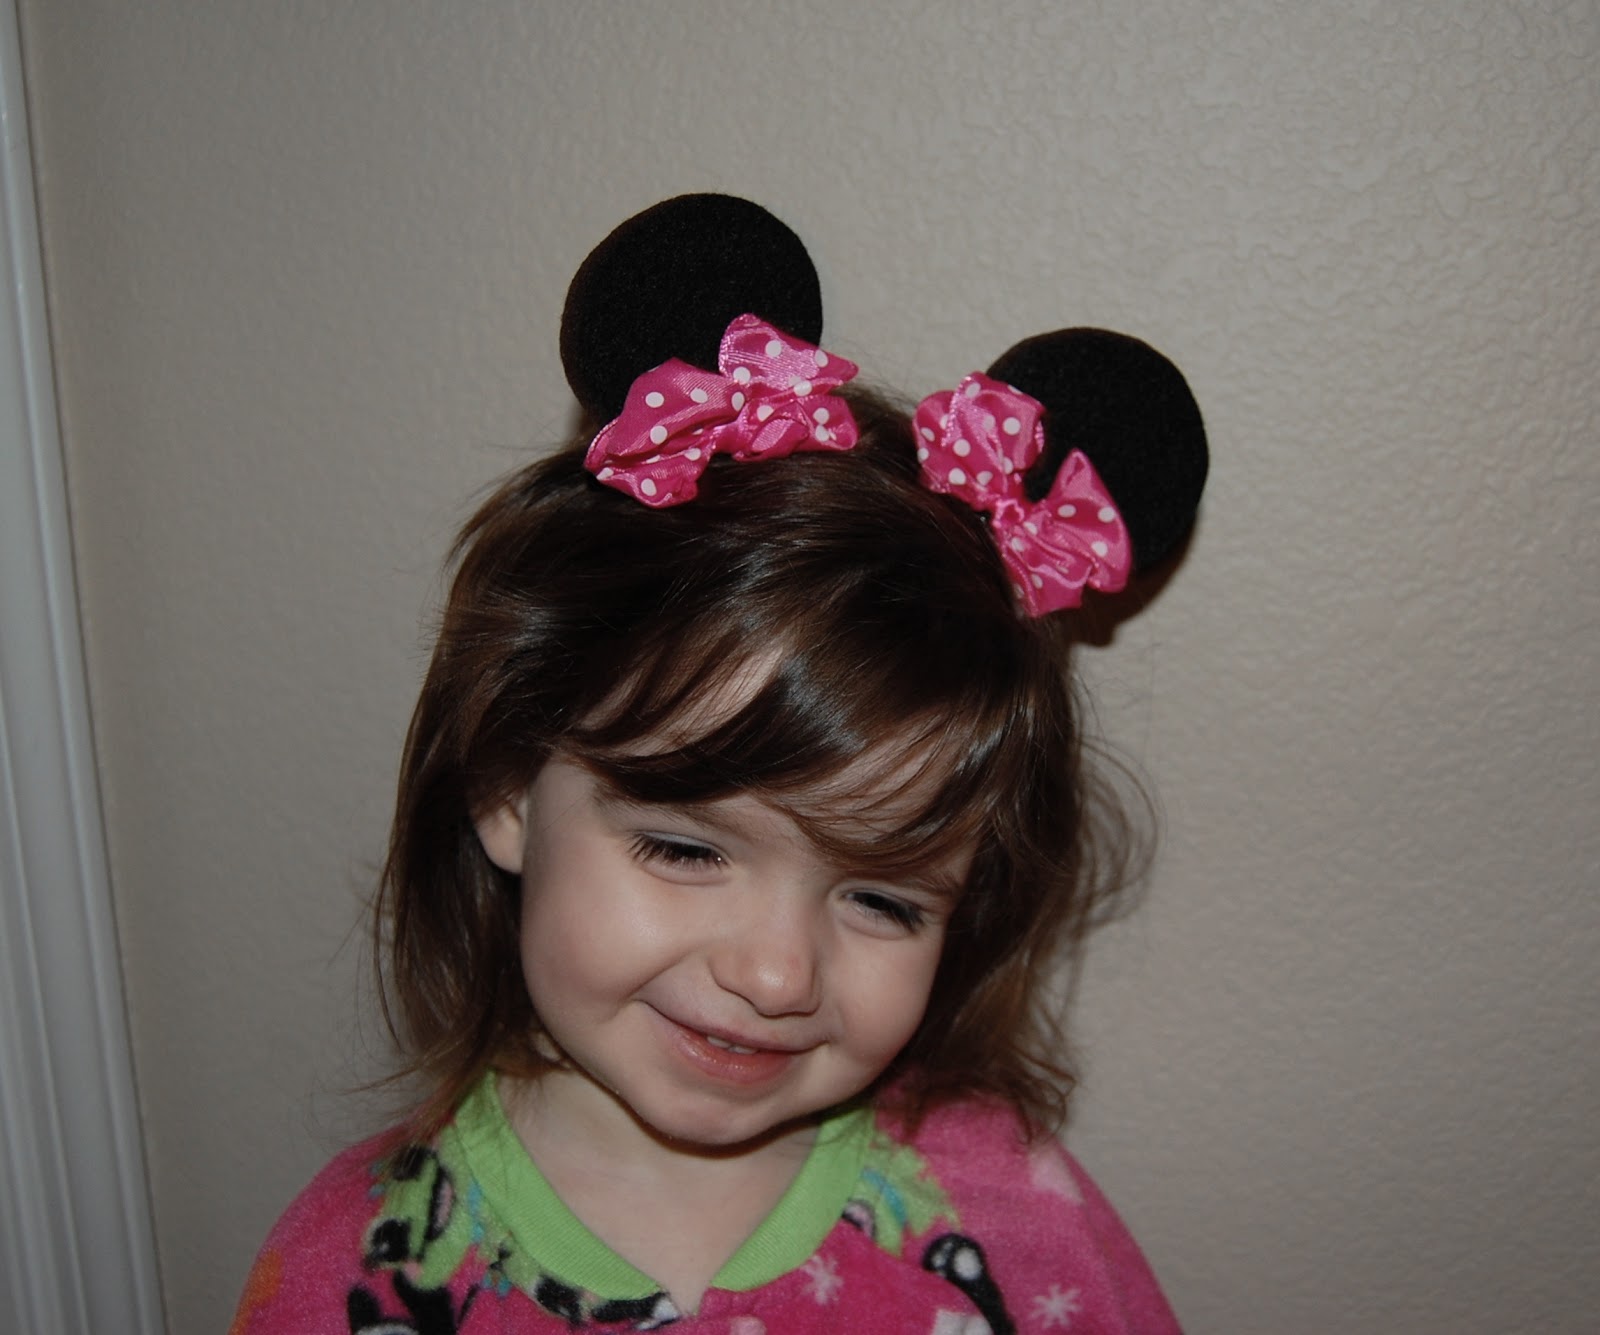 Of course we are not going with out making some fun hair bows and accessories. Take a look at these adorable Minnie Mouse ear hair clips that I made.